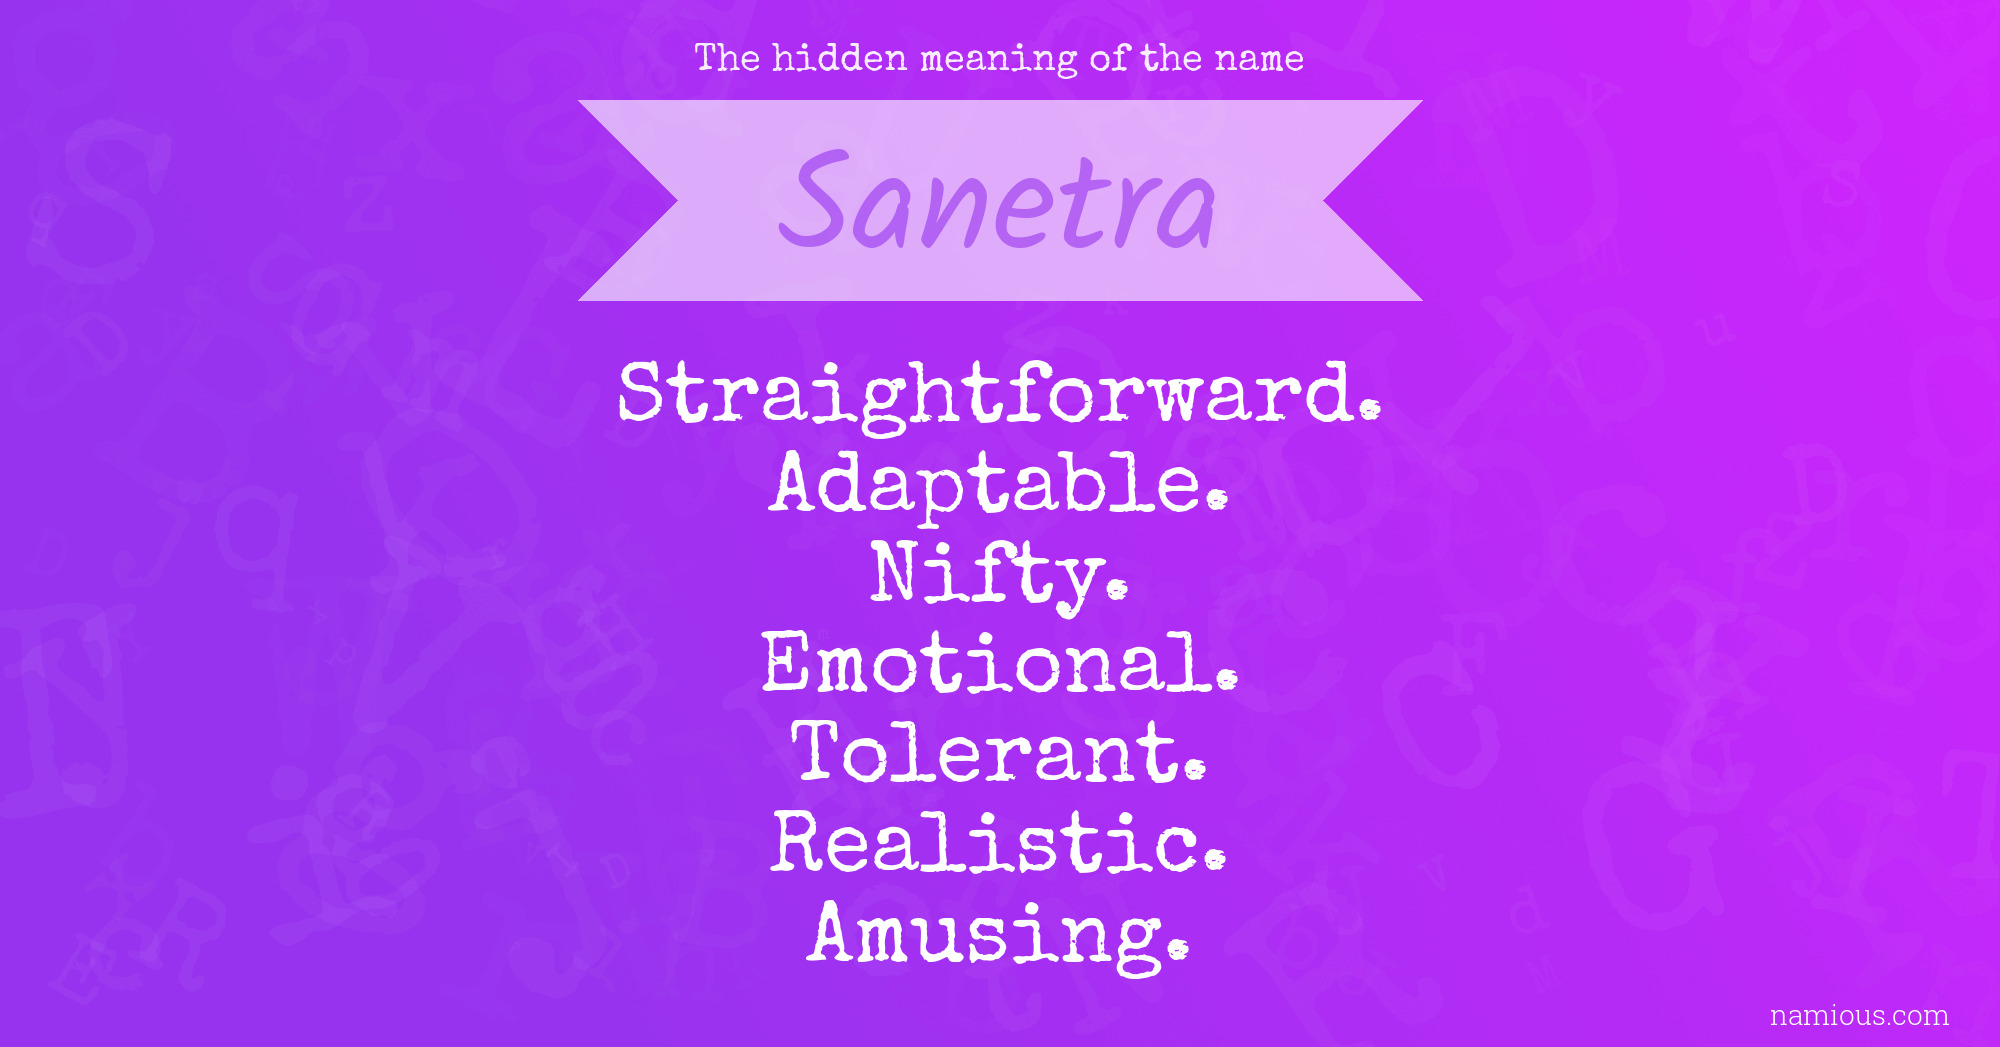 The hidden meaning of the name Sanetra